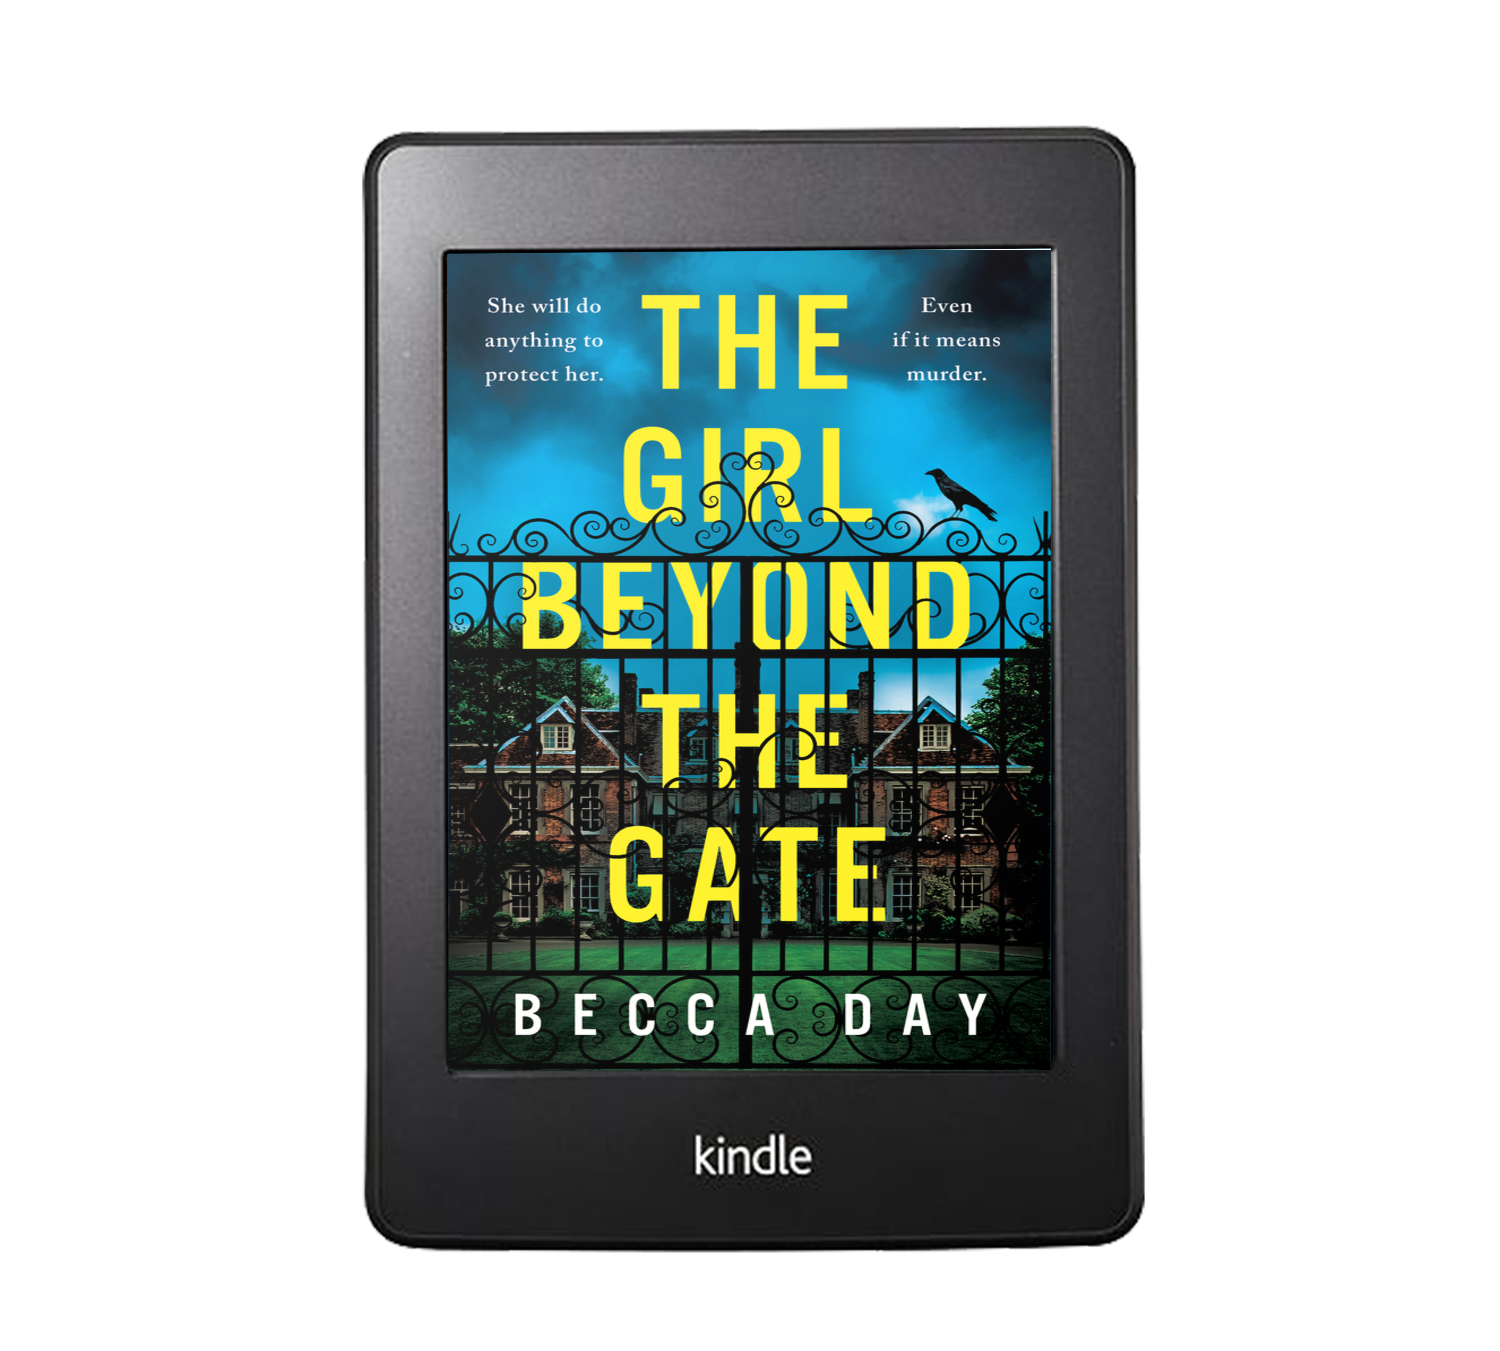 Mockup of The Girl Beyond The Gate by Becca Day. The cover shows two tudor houses surrounded by a gate